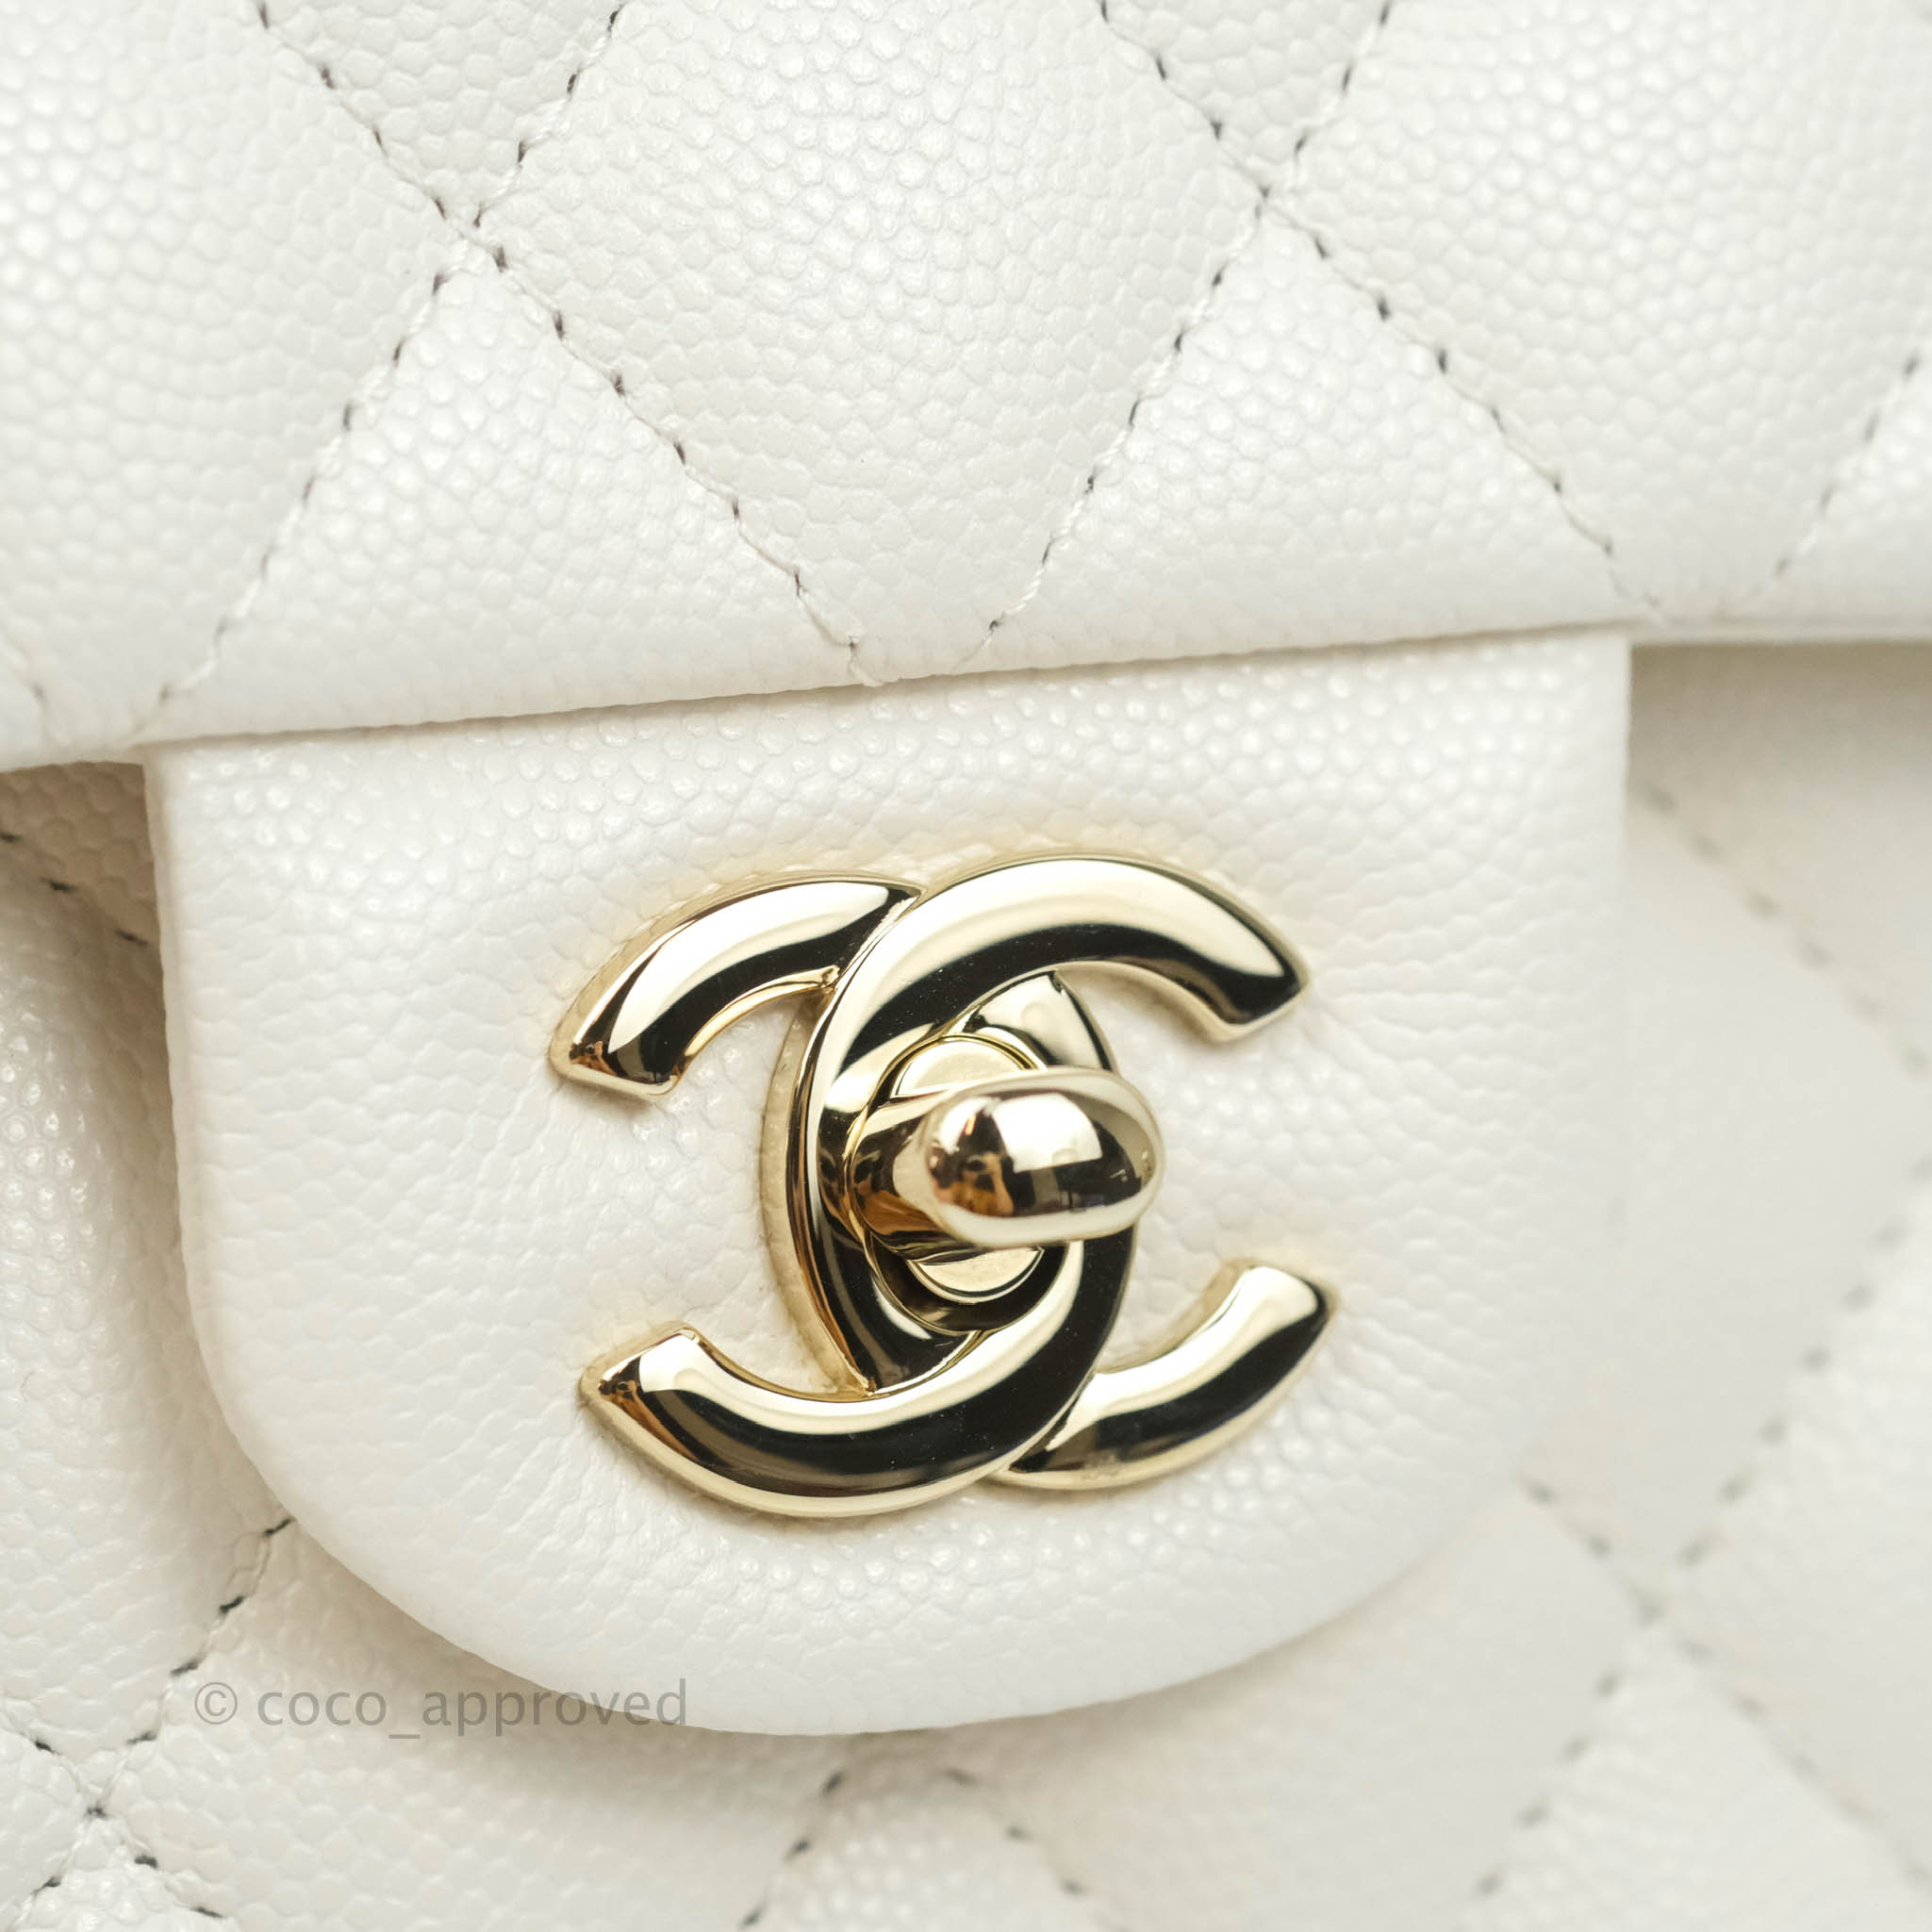 Exclusive CHANEL Quilted Small Chain Melody Flap - Luxury Pre